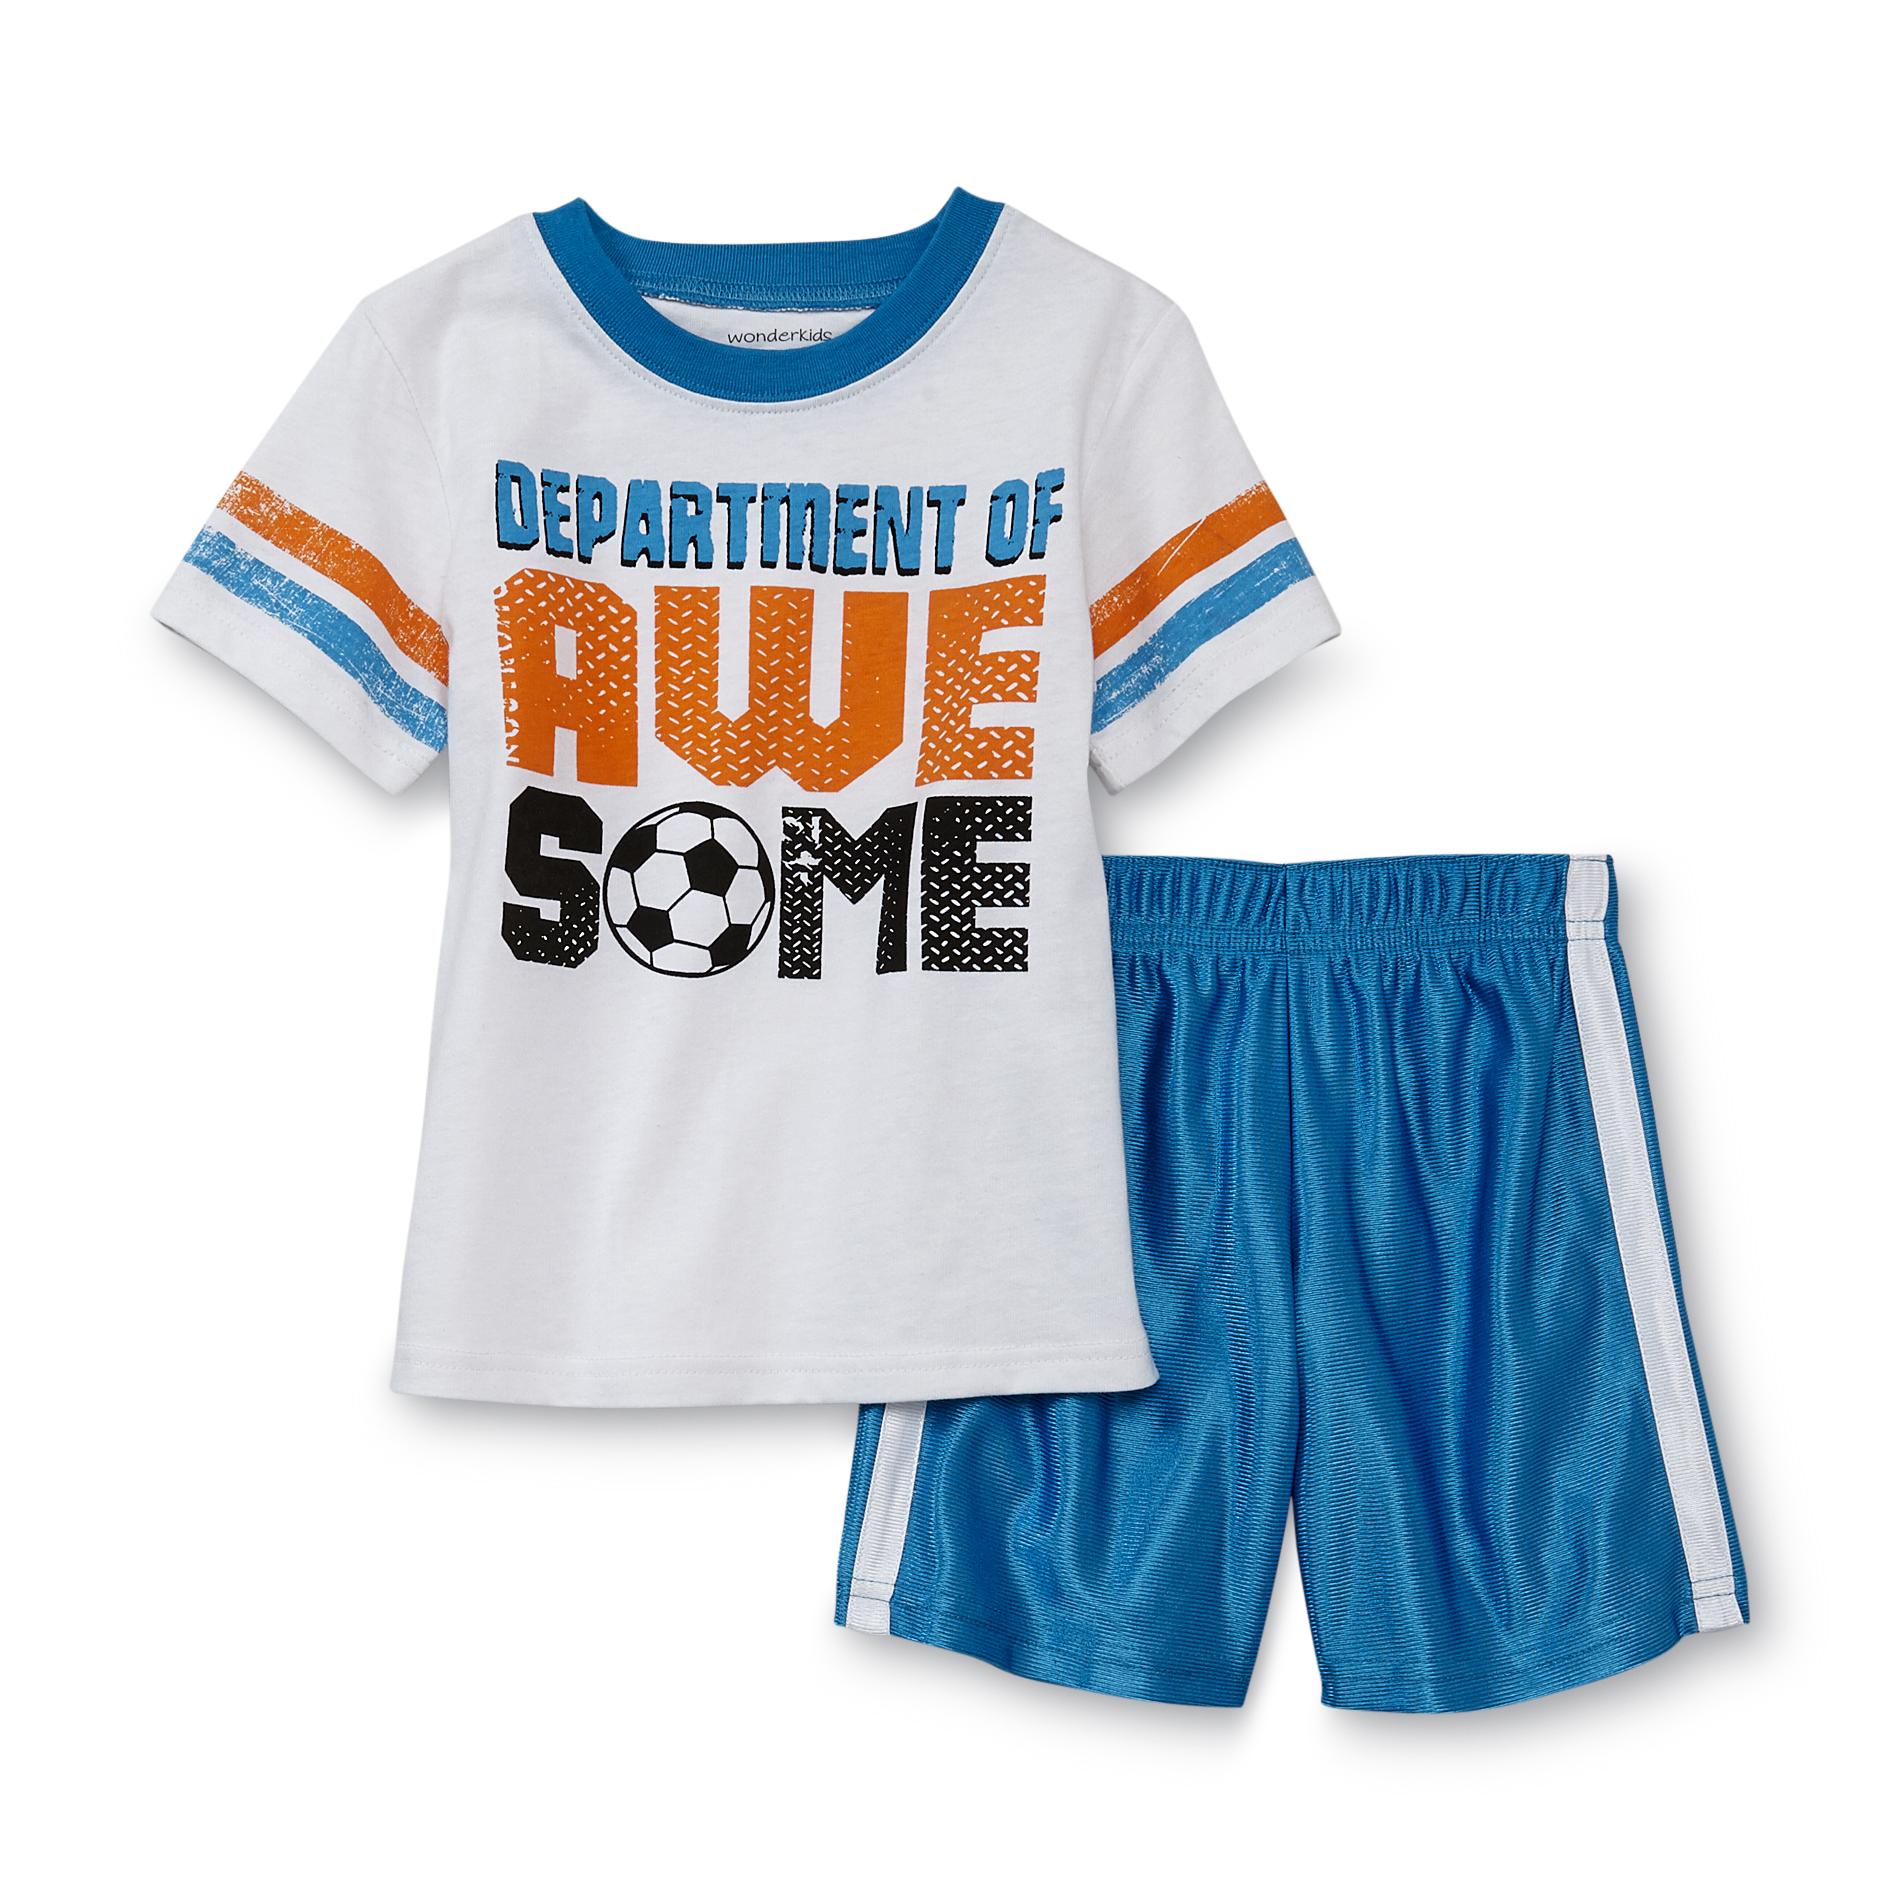 WonderKids Infant & Toddler Boy's Graphic T-Shirt & Shorts - Awesome